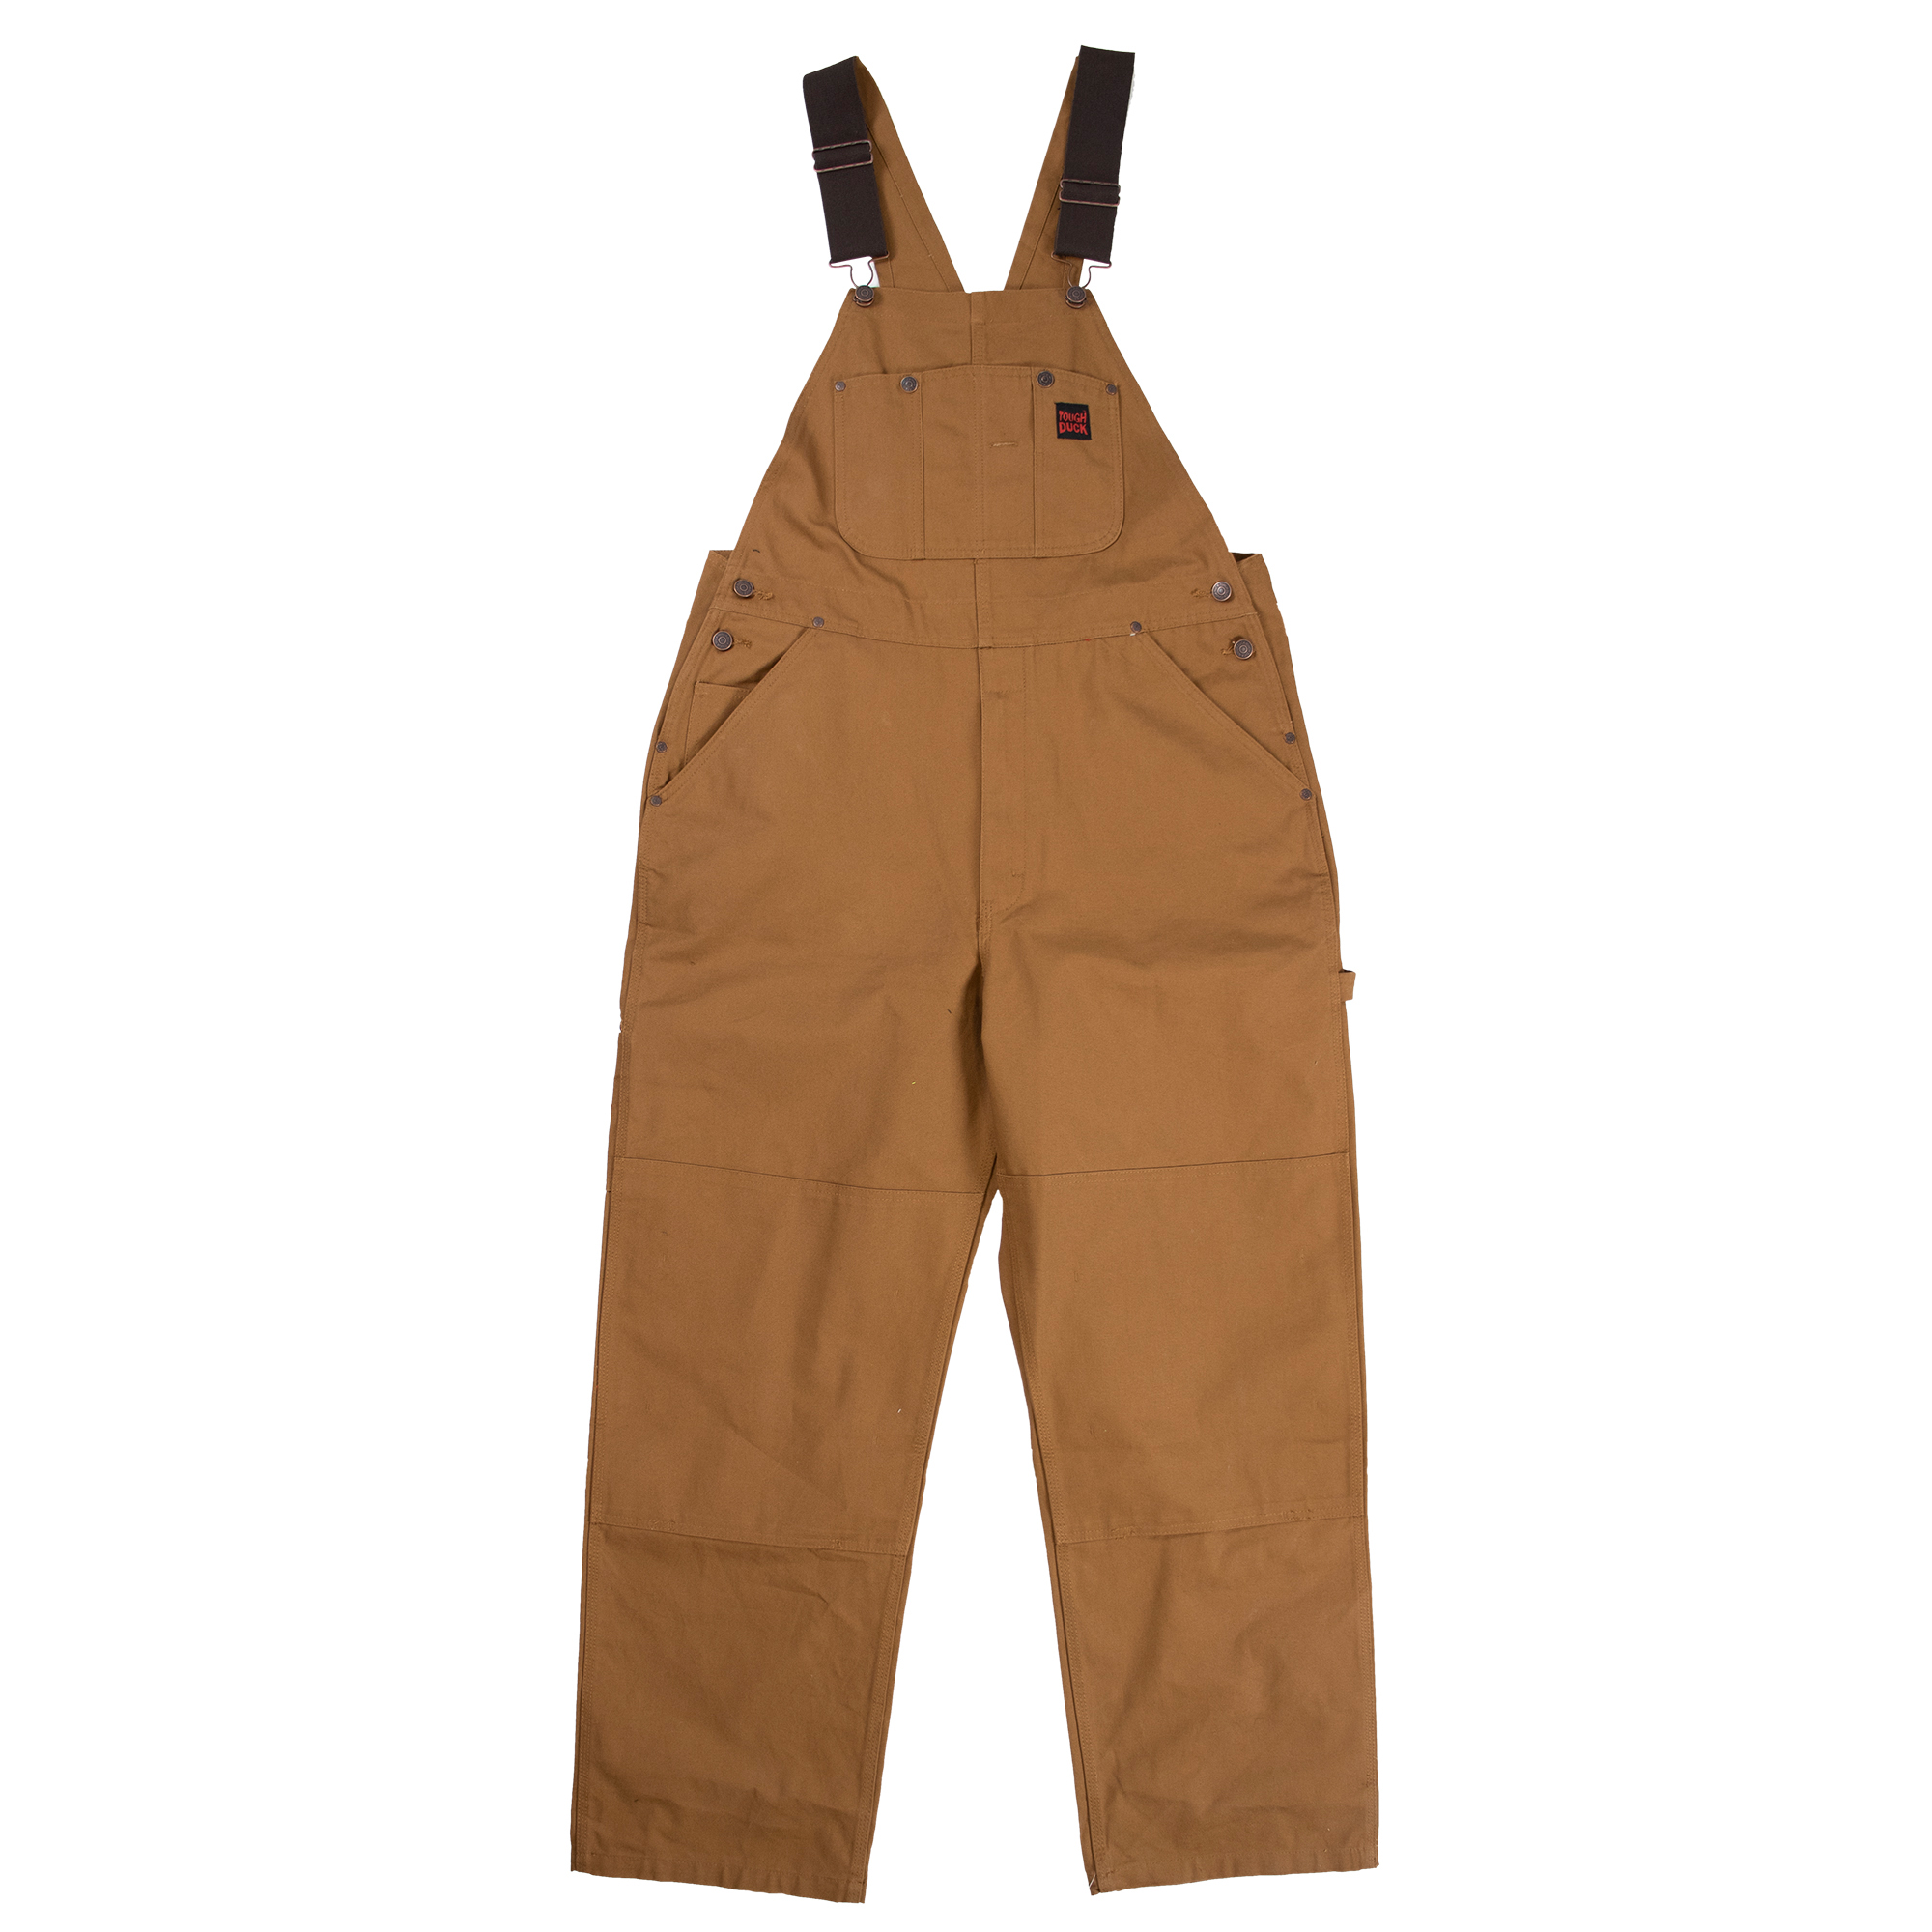 UNLINED BIB OVERALL - 3XL Brown